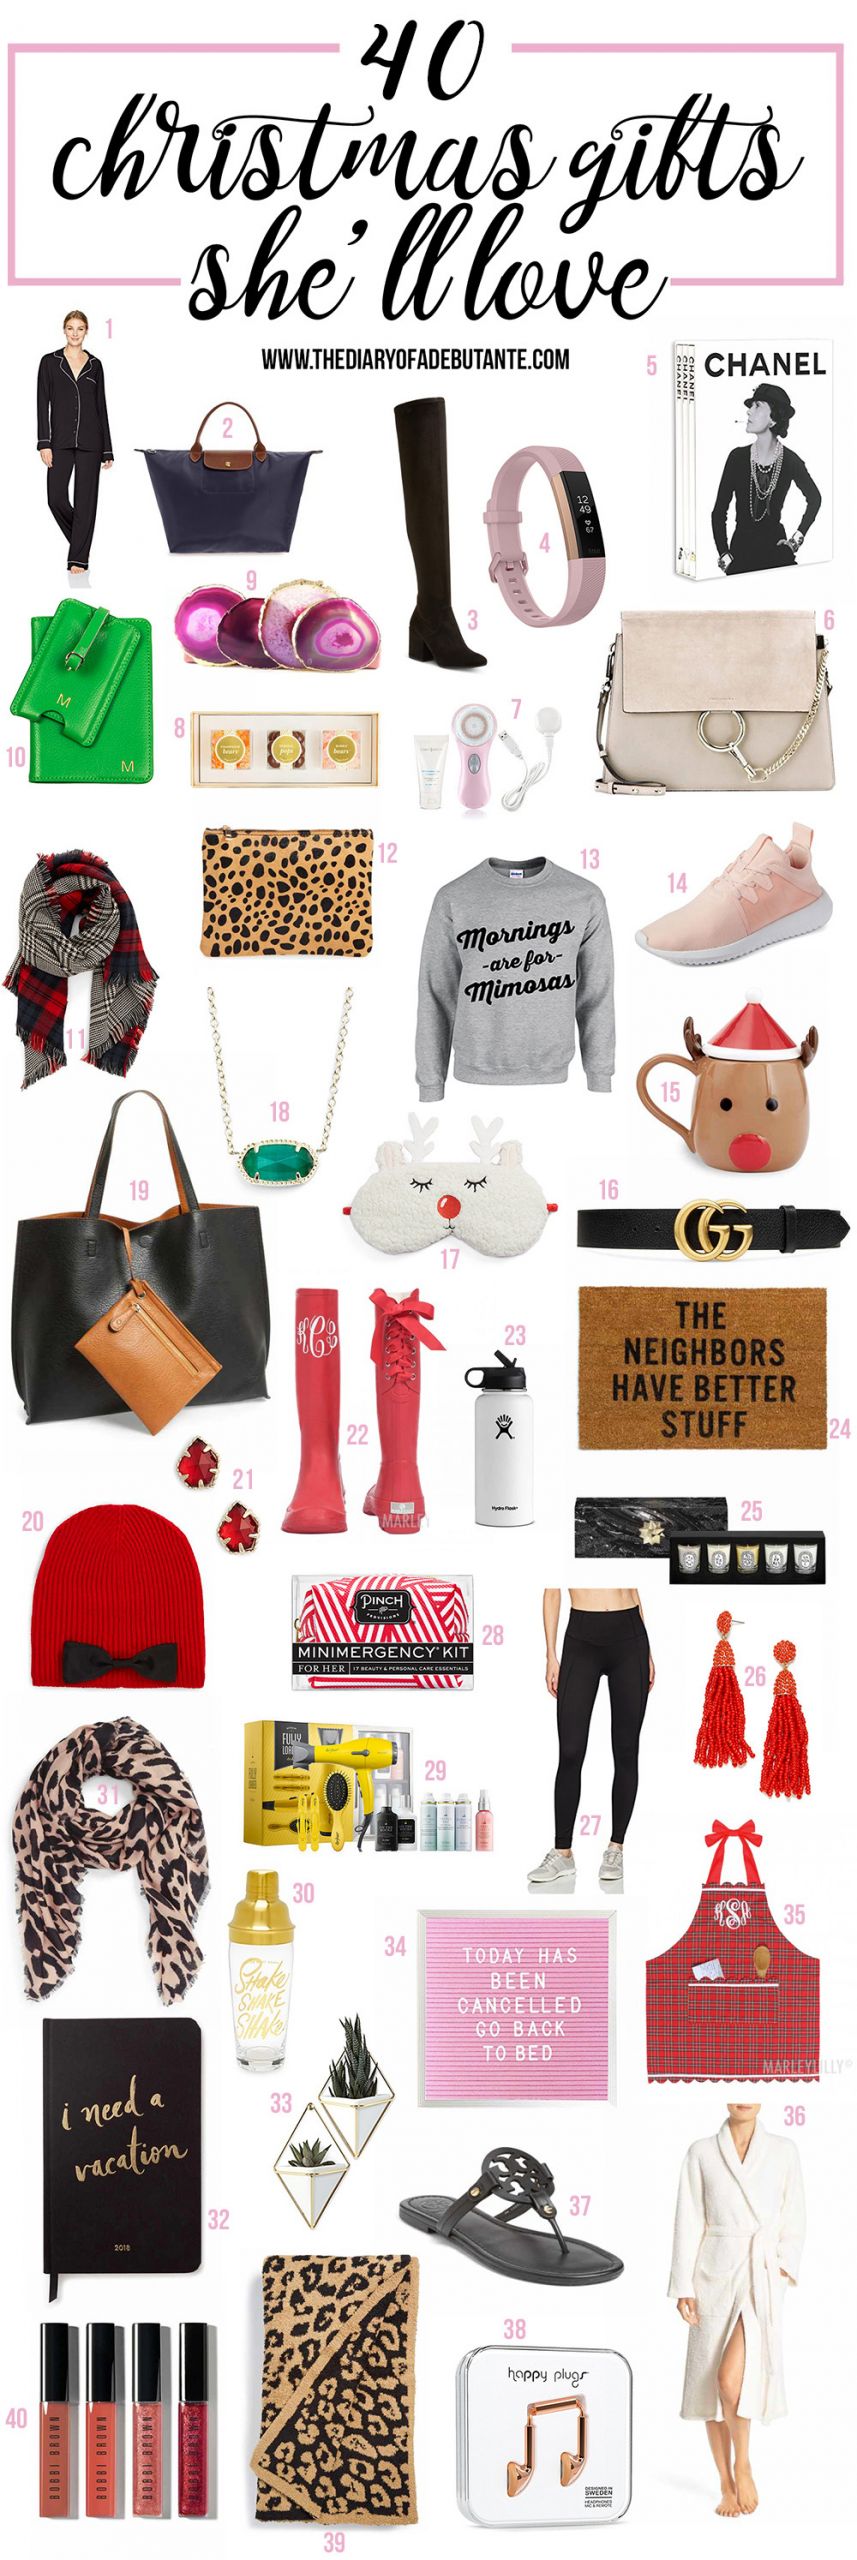 Christmas Gift Ideas For Girlfriends
 Cool Gift Ideas for Girlfriend Mom or BFF this Holiday